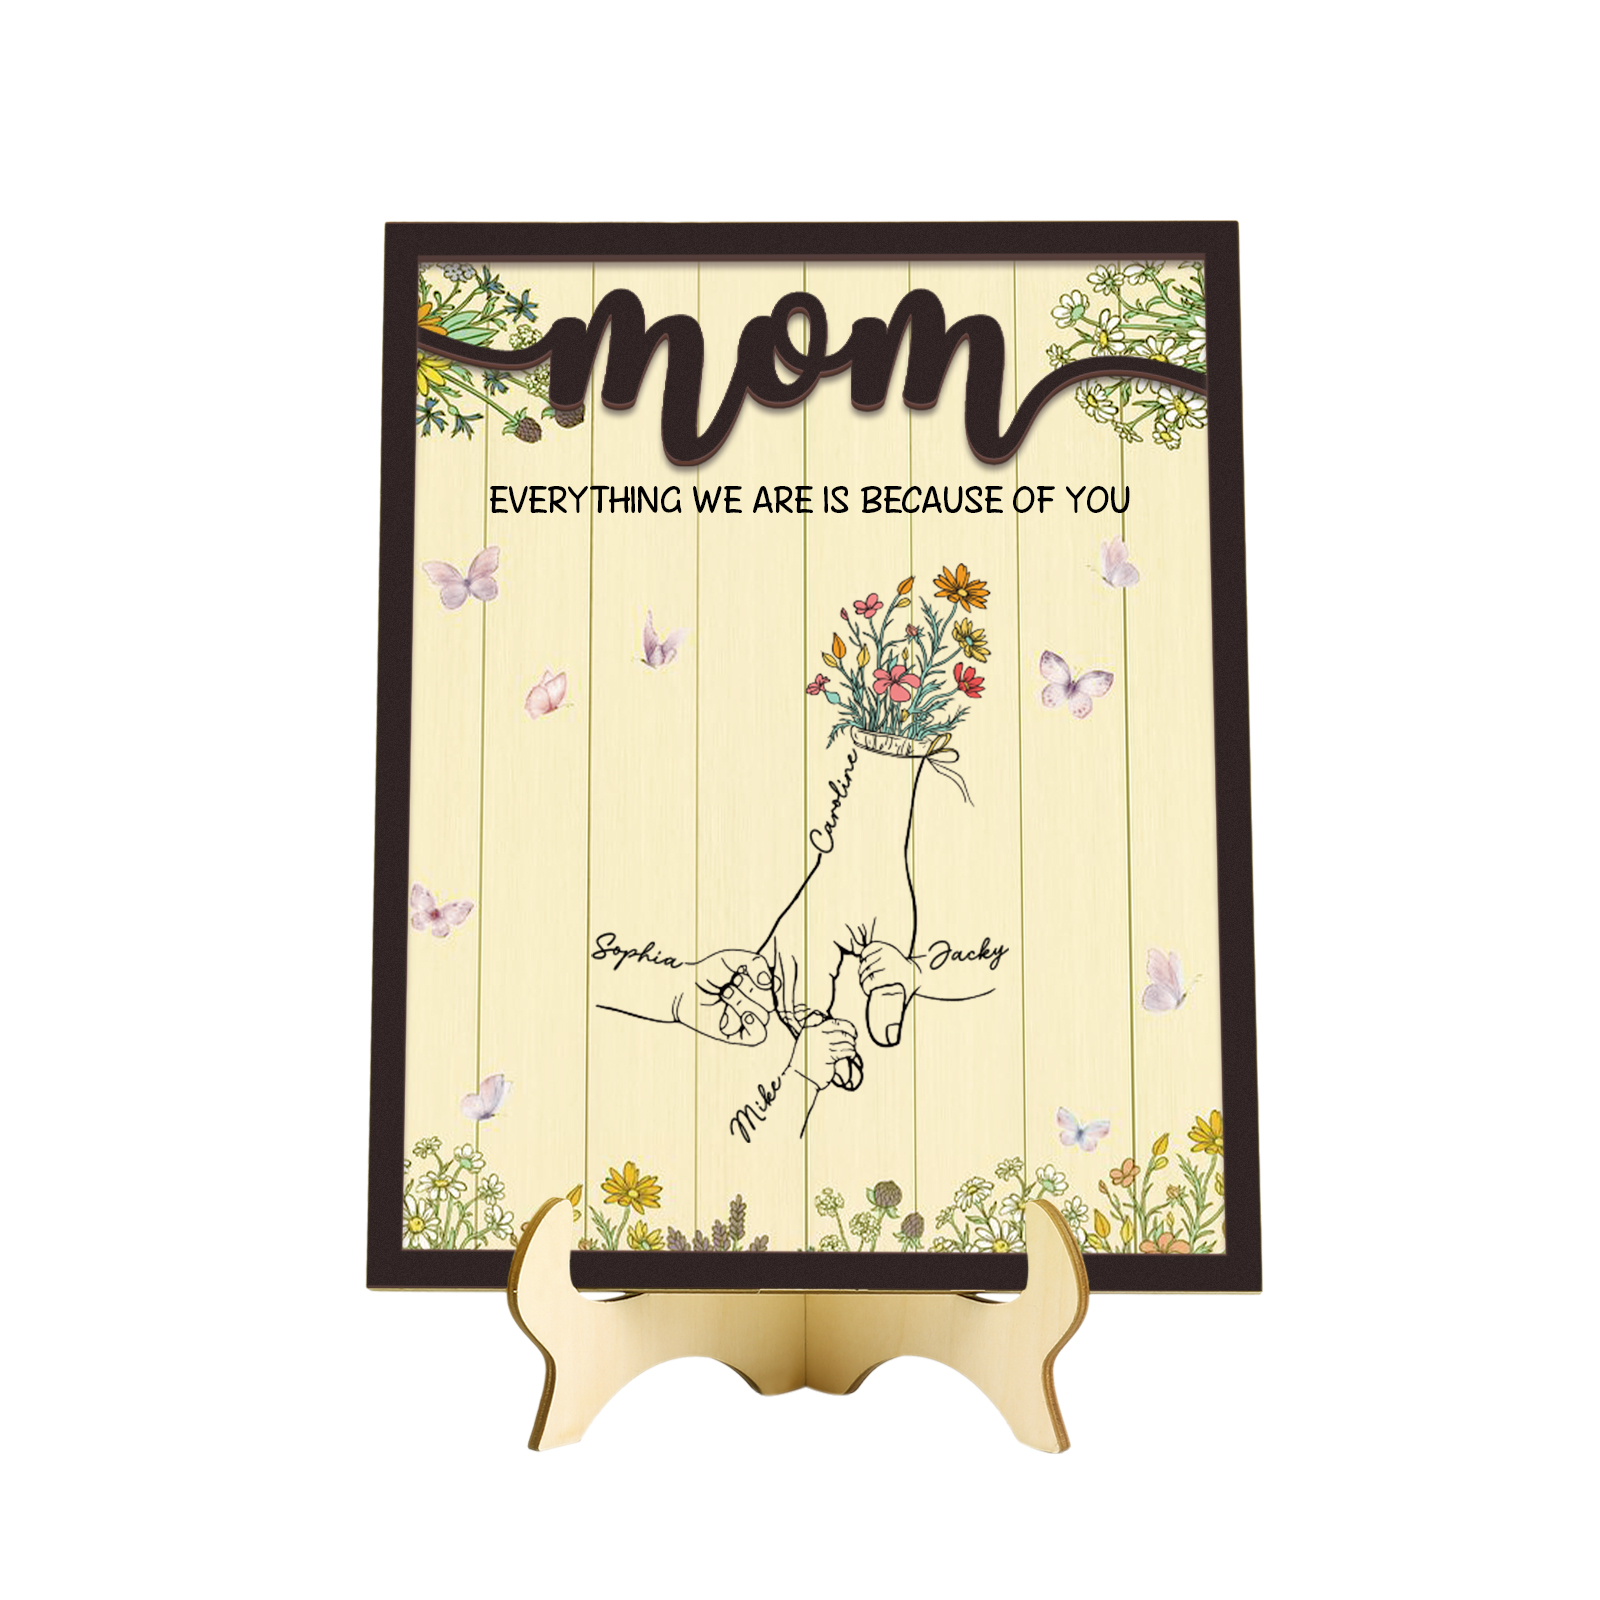 4 Names - Personalized Customizable Text Home Frame Wooden Ornament Holding Hands Flower Elements Style Ornament for Mom